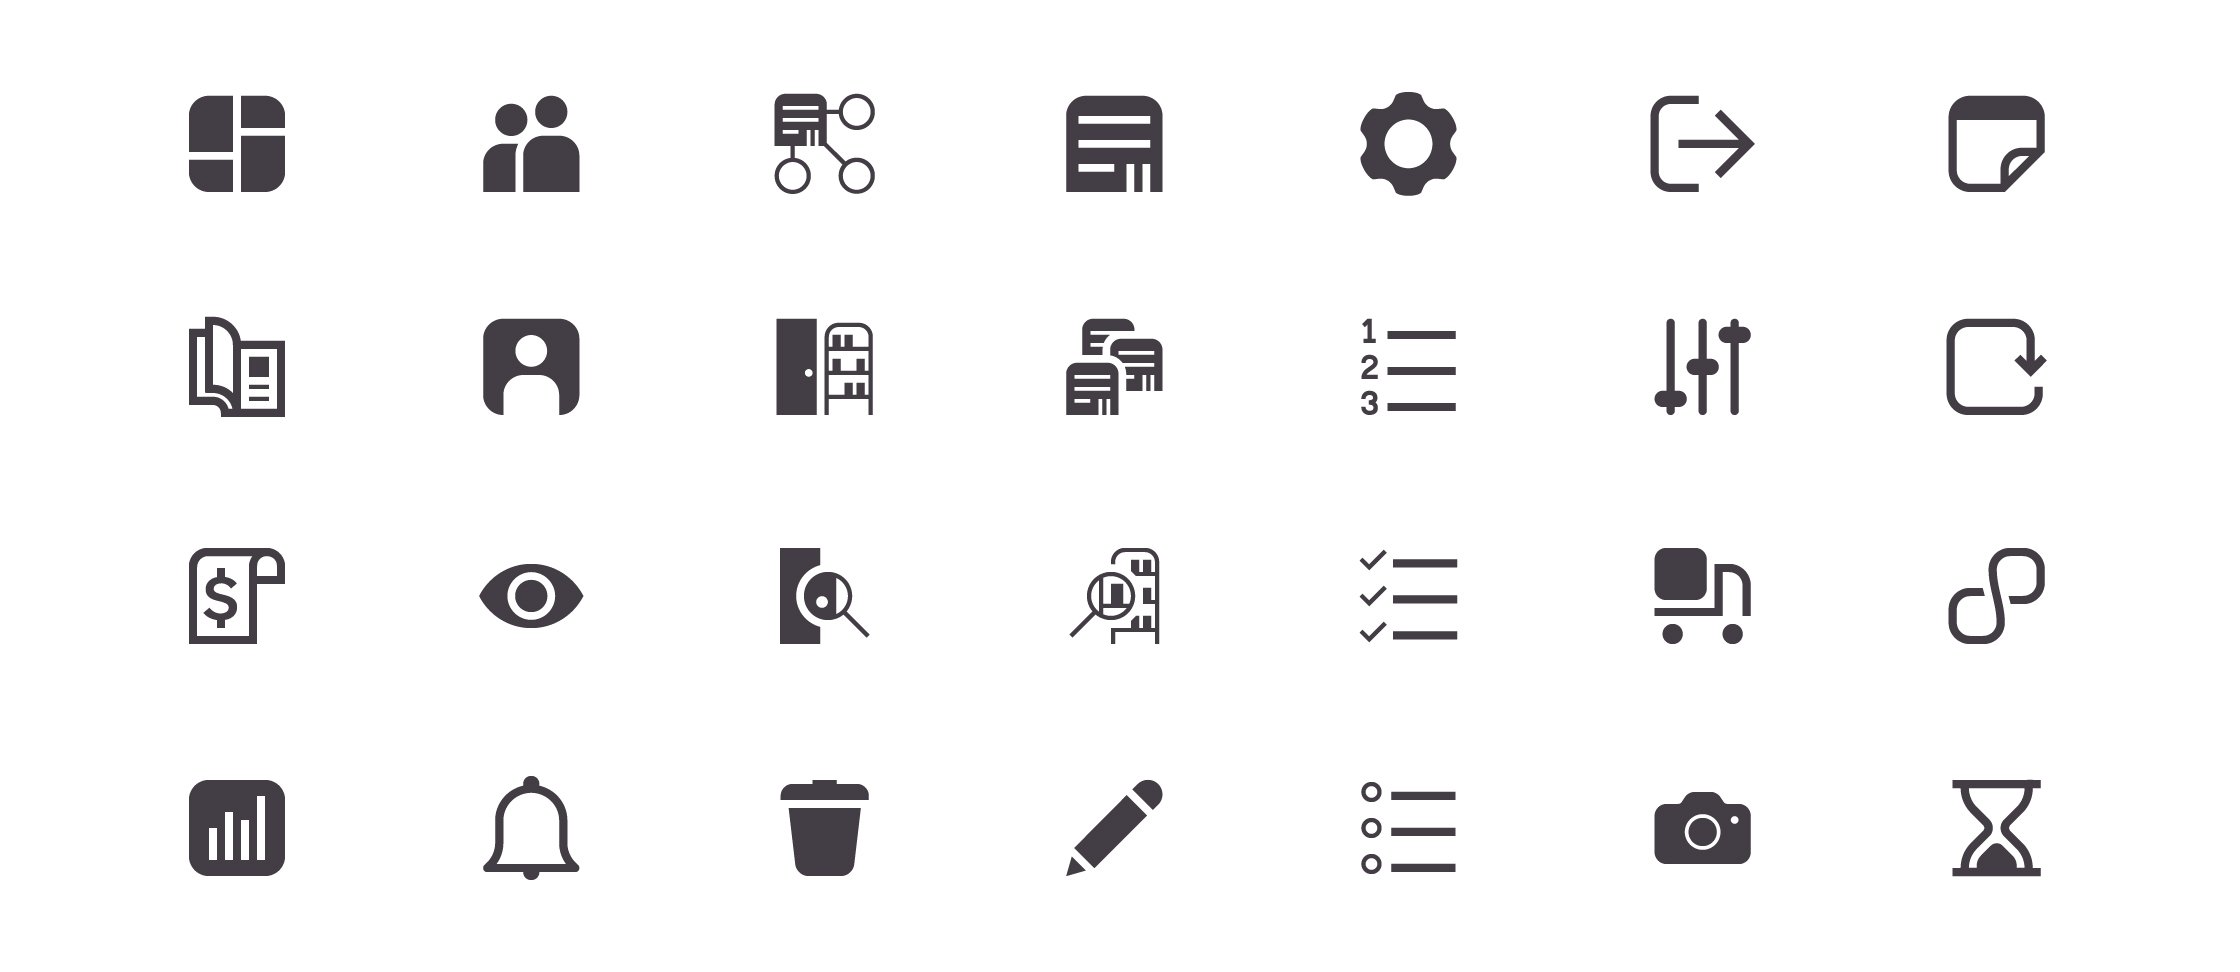 Tech Startup App: Functional Iconography